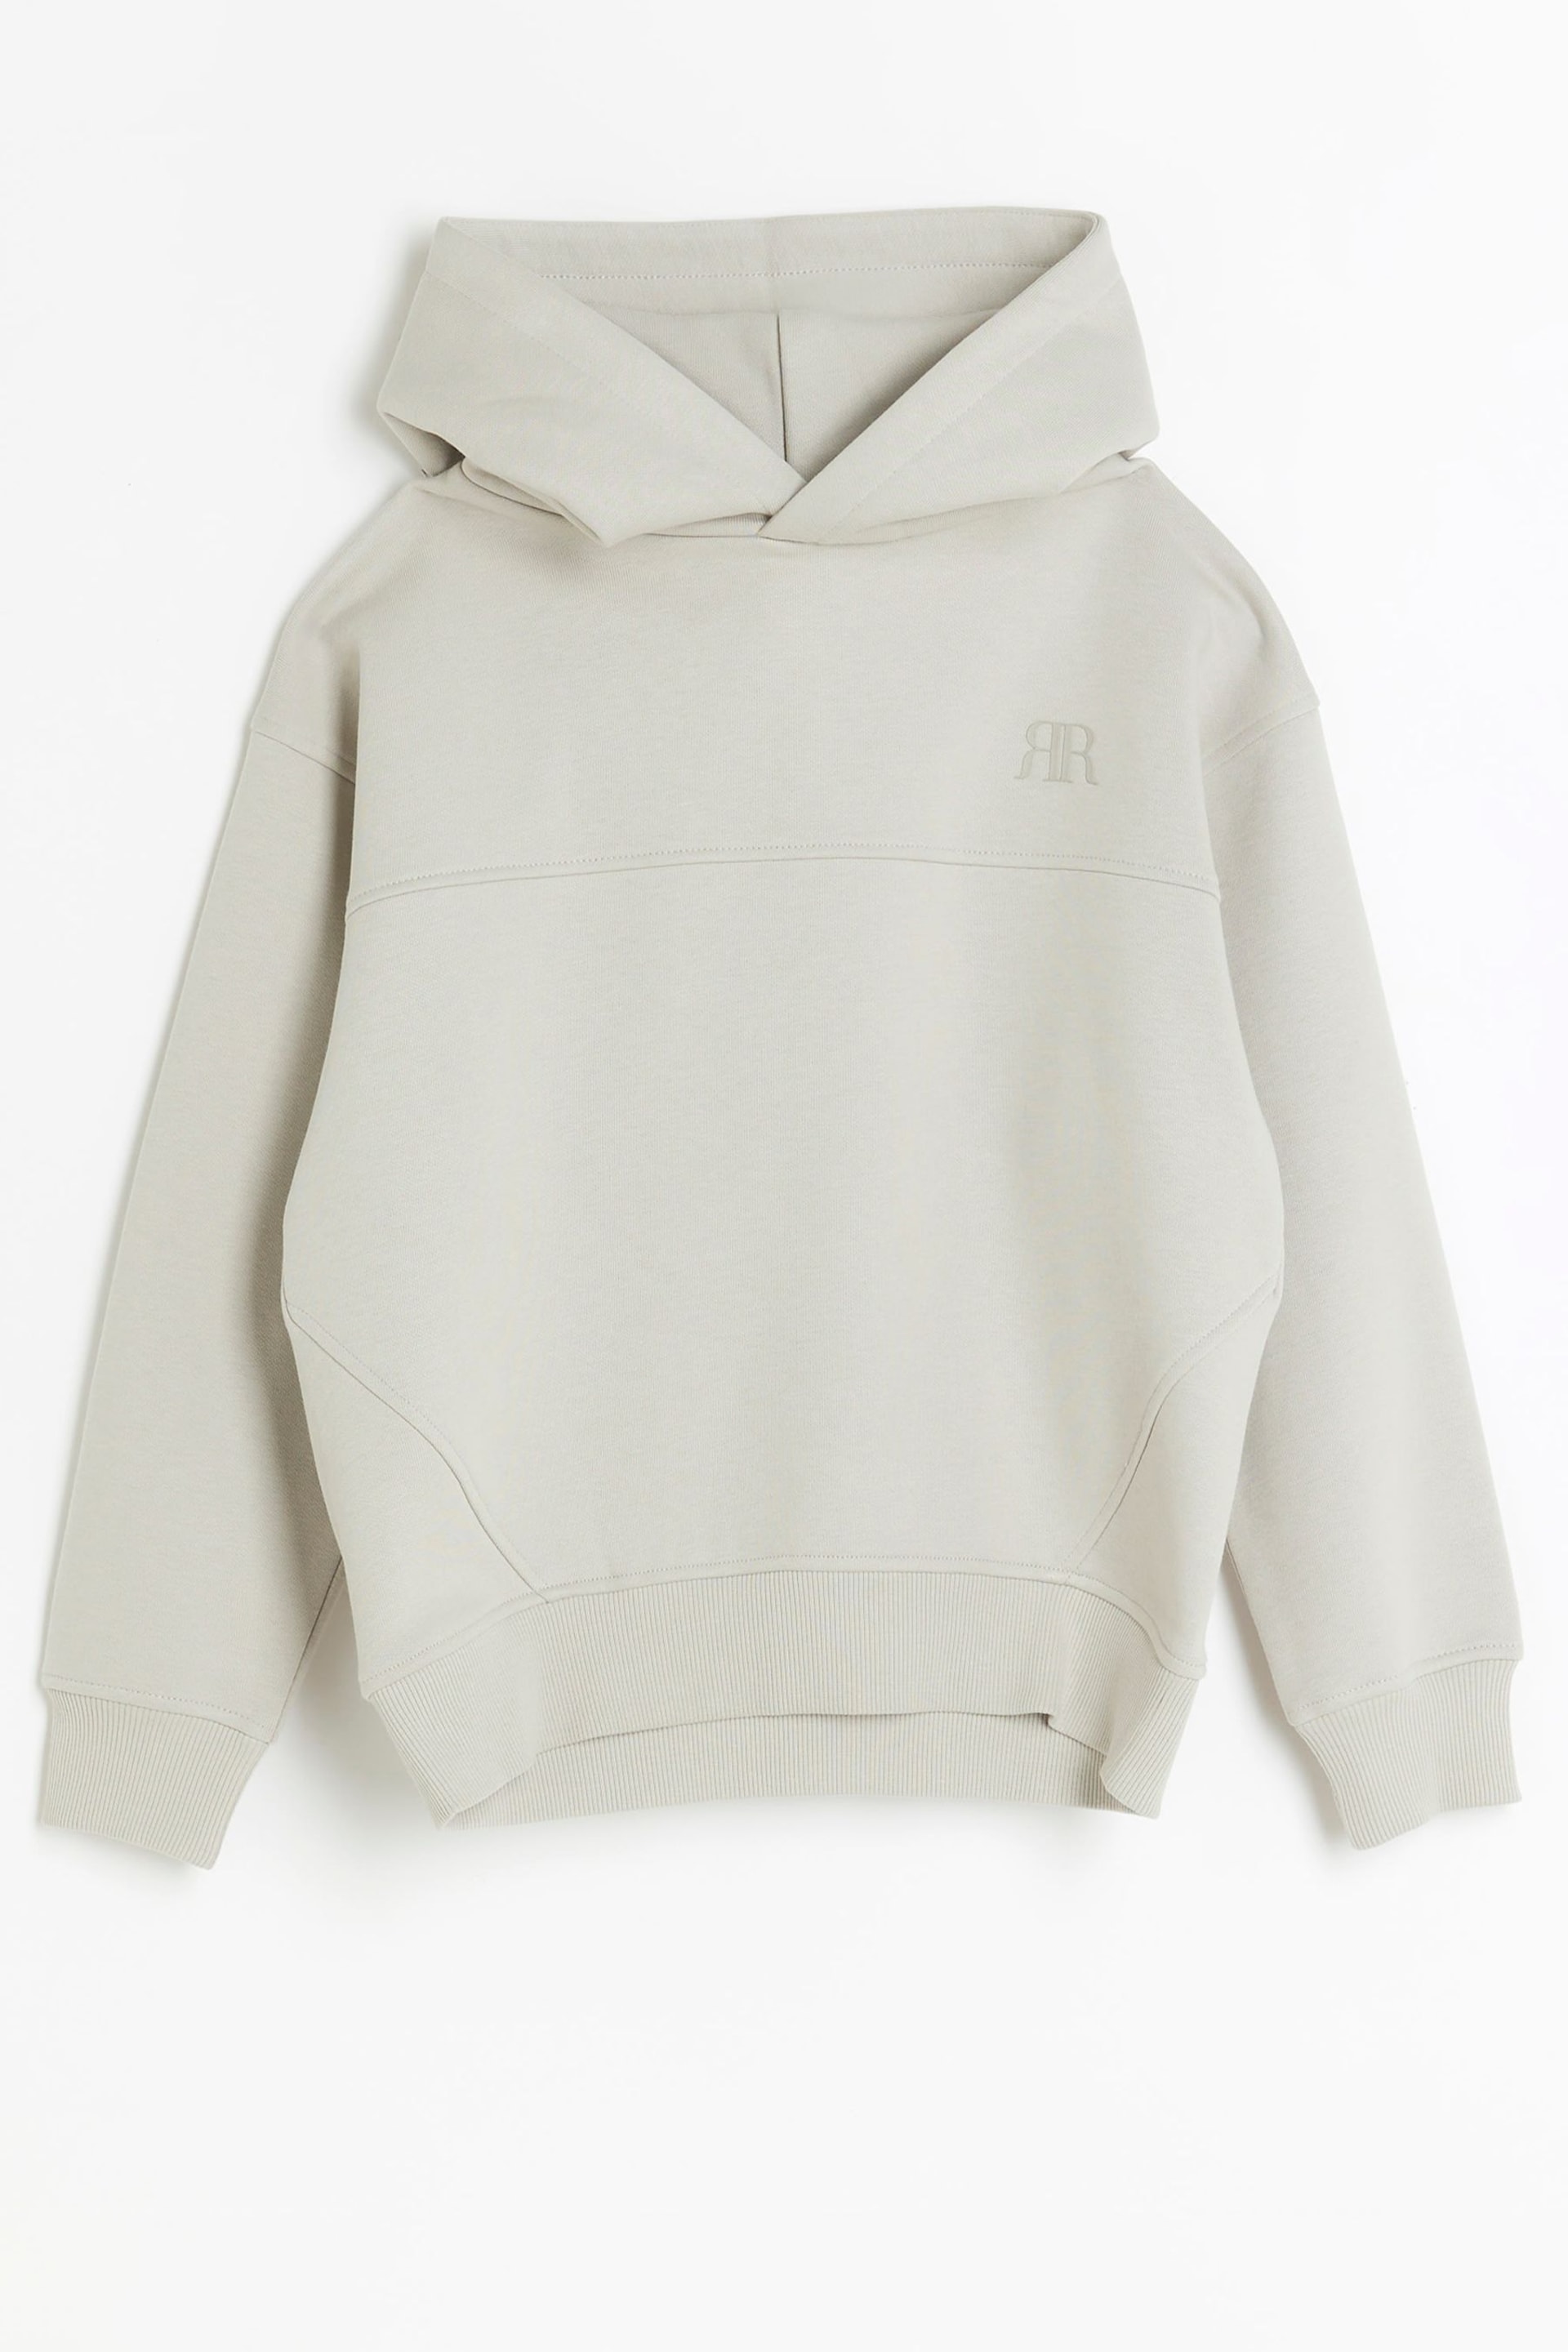 River Island Natural Boys Essentials Hoodie - Image 4 of 6